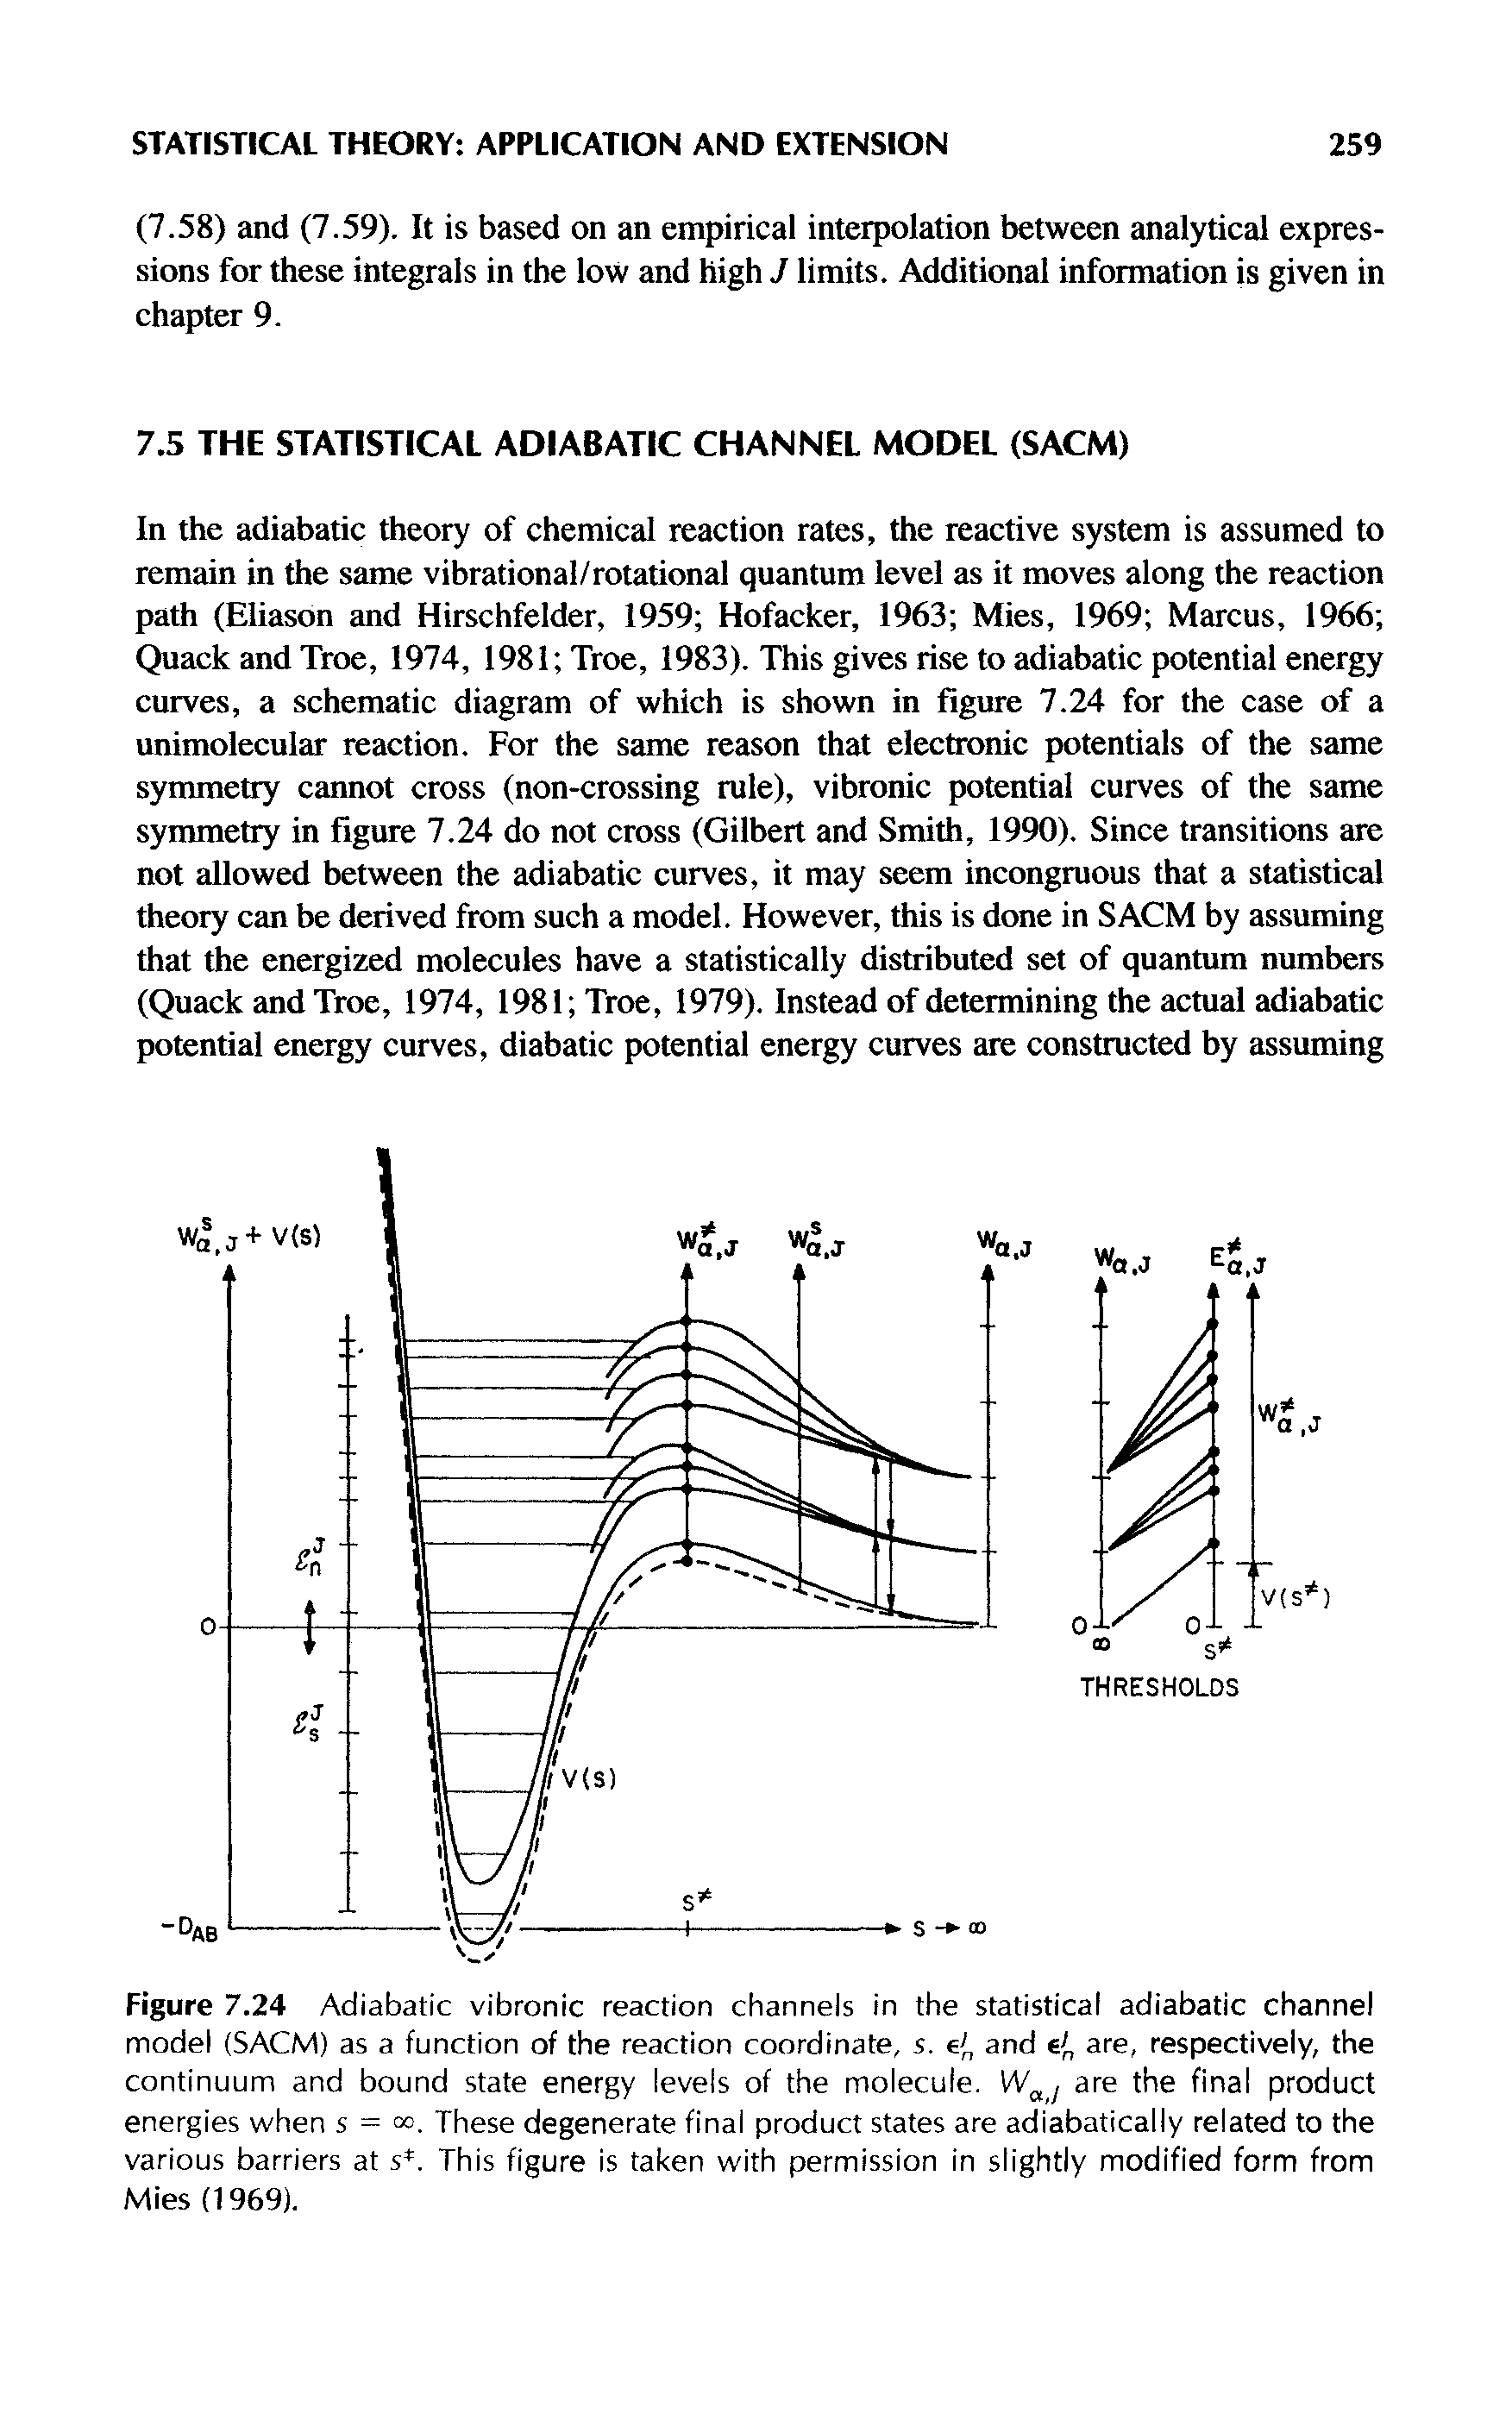 Figure 7.24 Adiabatic vibronic reaction channels in the statistical adiabatic channel model (SACM) as a function of the reaction coordinate, s. e(, and e(, are, respectively, the continuum and bound state energy levels of the molecule. are the final product energies when s = < . These degenerate final product states are adiabatically related to the various barriers at s. This figure is taken with permission in slightly modified form from Mies (1969).